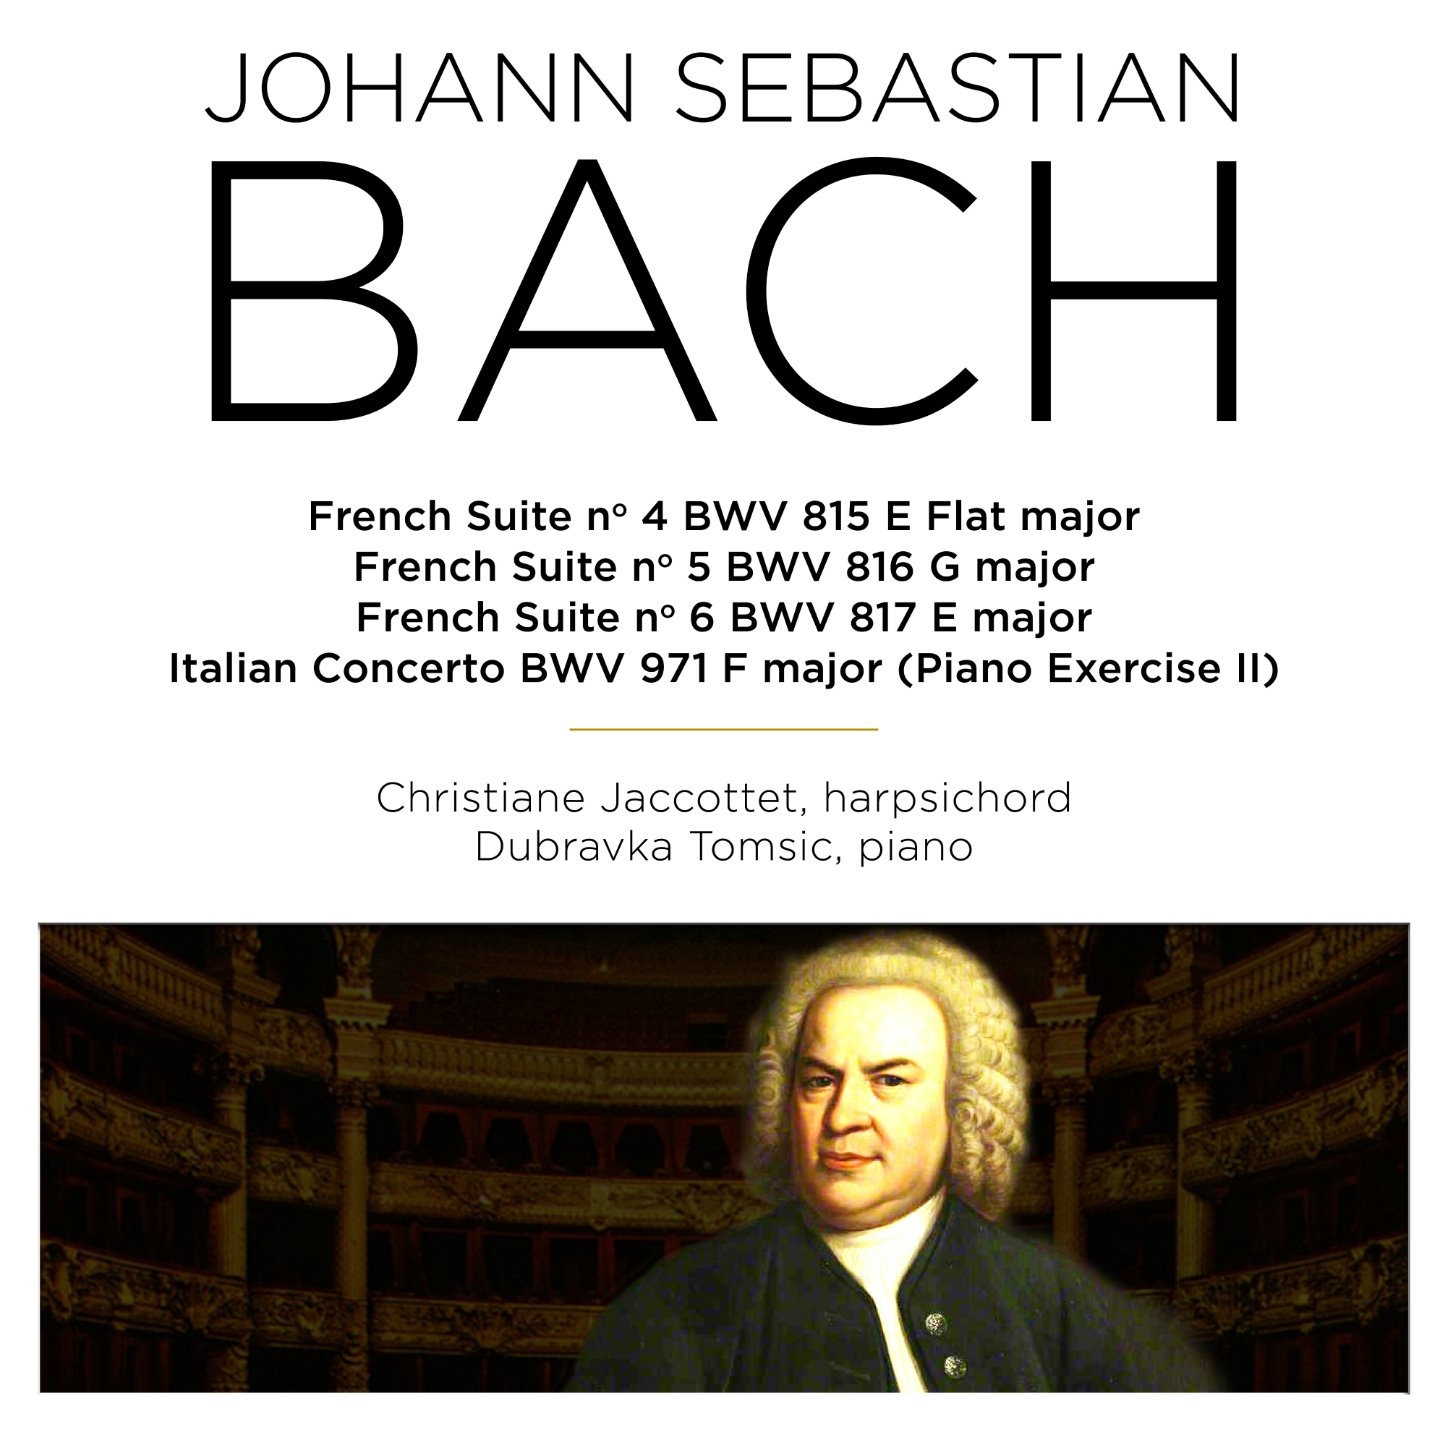 French Suite No. 6 in E Major, BWV 817:IV. Gavotte